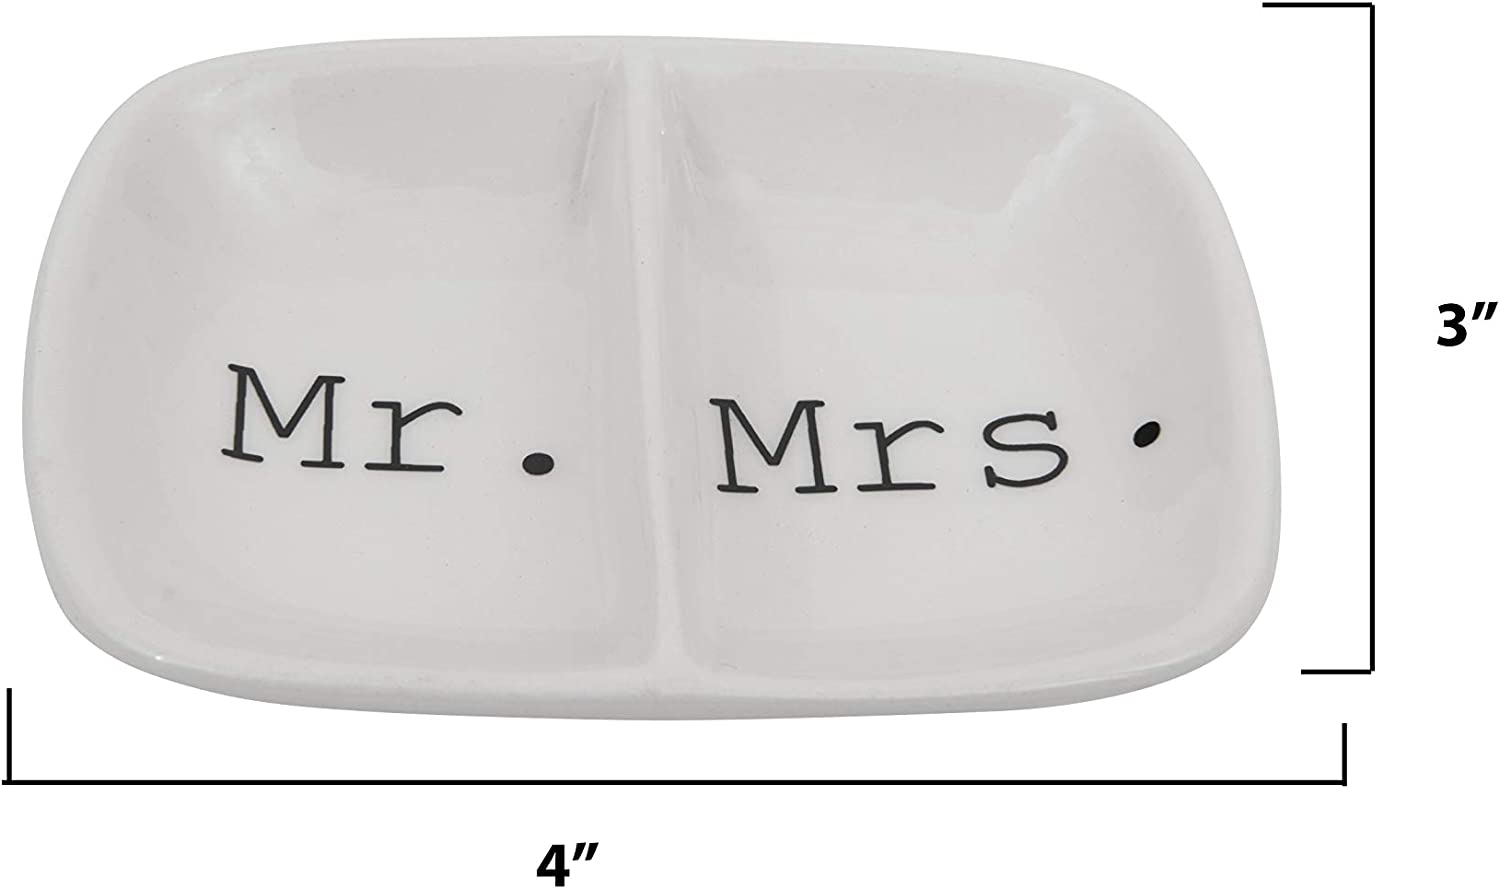 Creative Co-Op Ceramic Mr. & Mrs. Divided Ring Dish - image 2 of 7